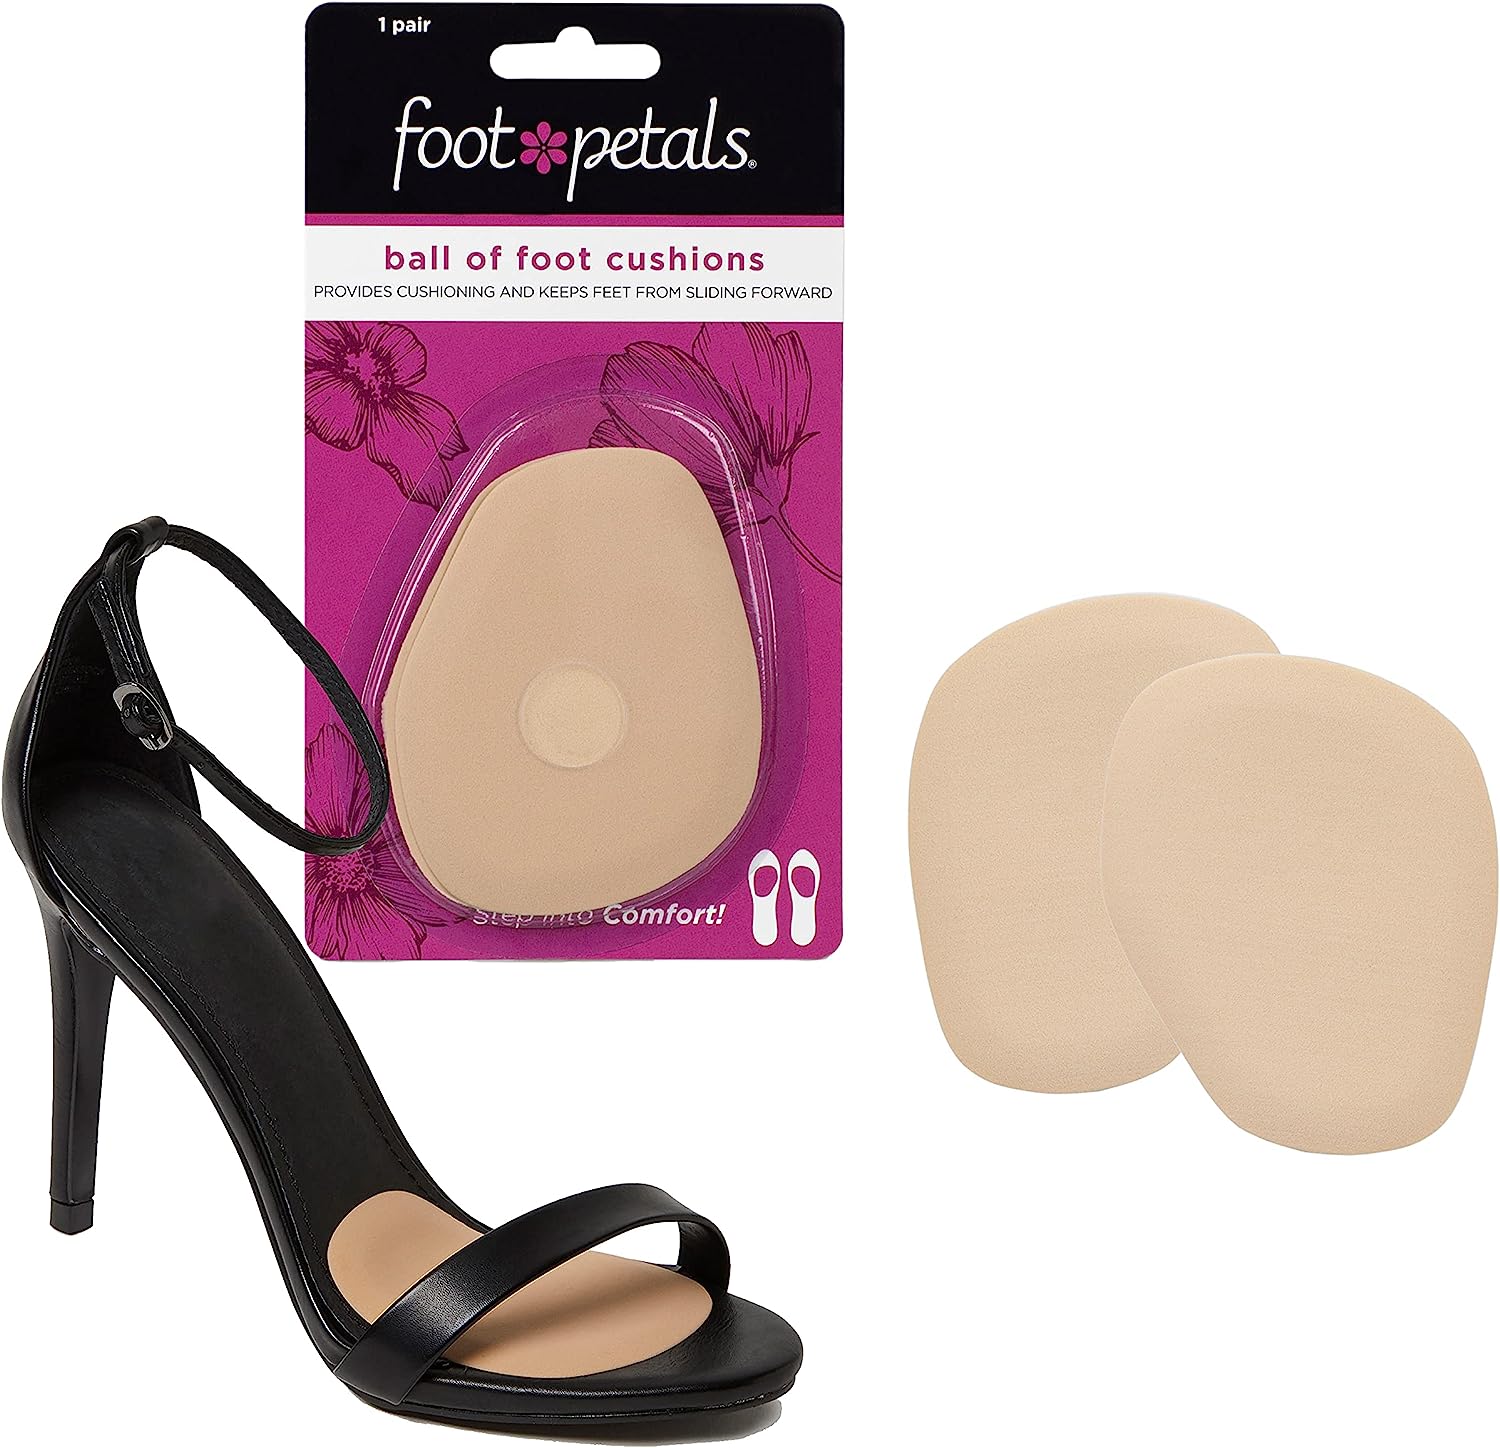 Foot Petals Women's Rounded 1 Pair, Khaki, One Size